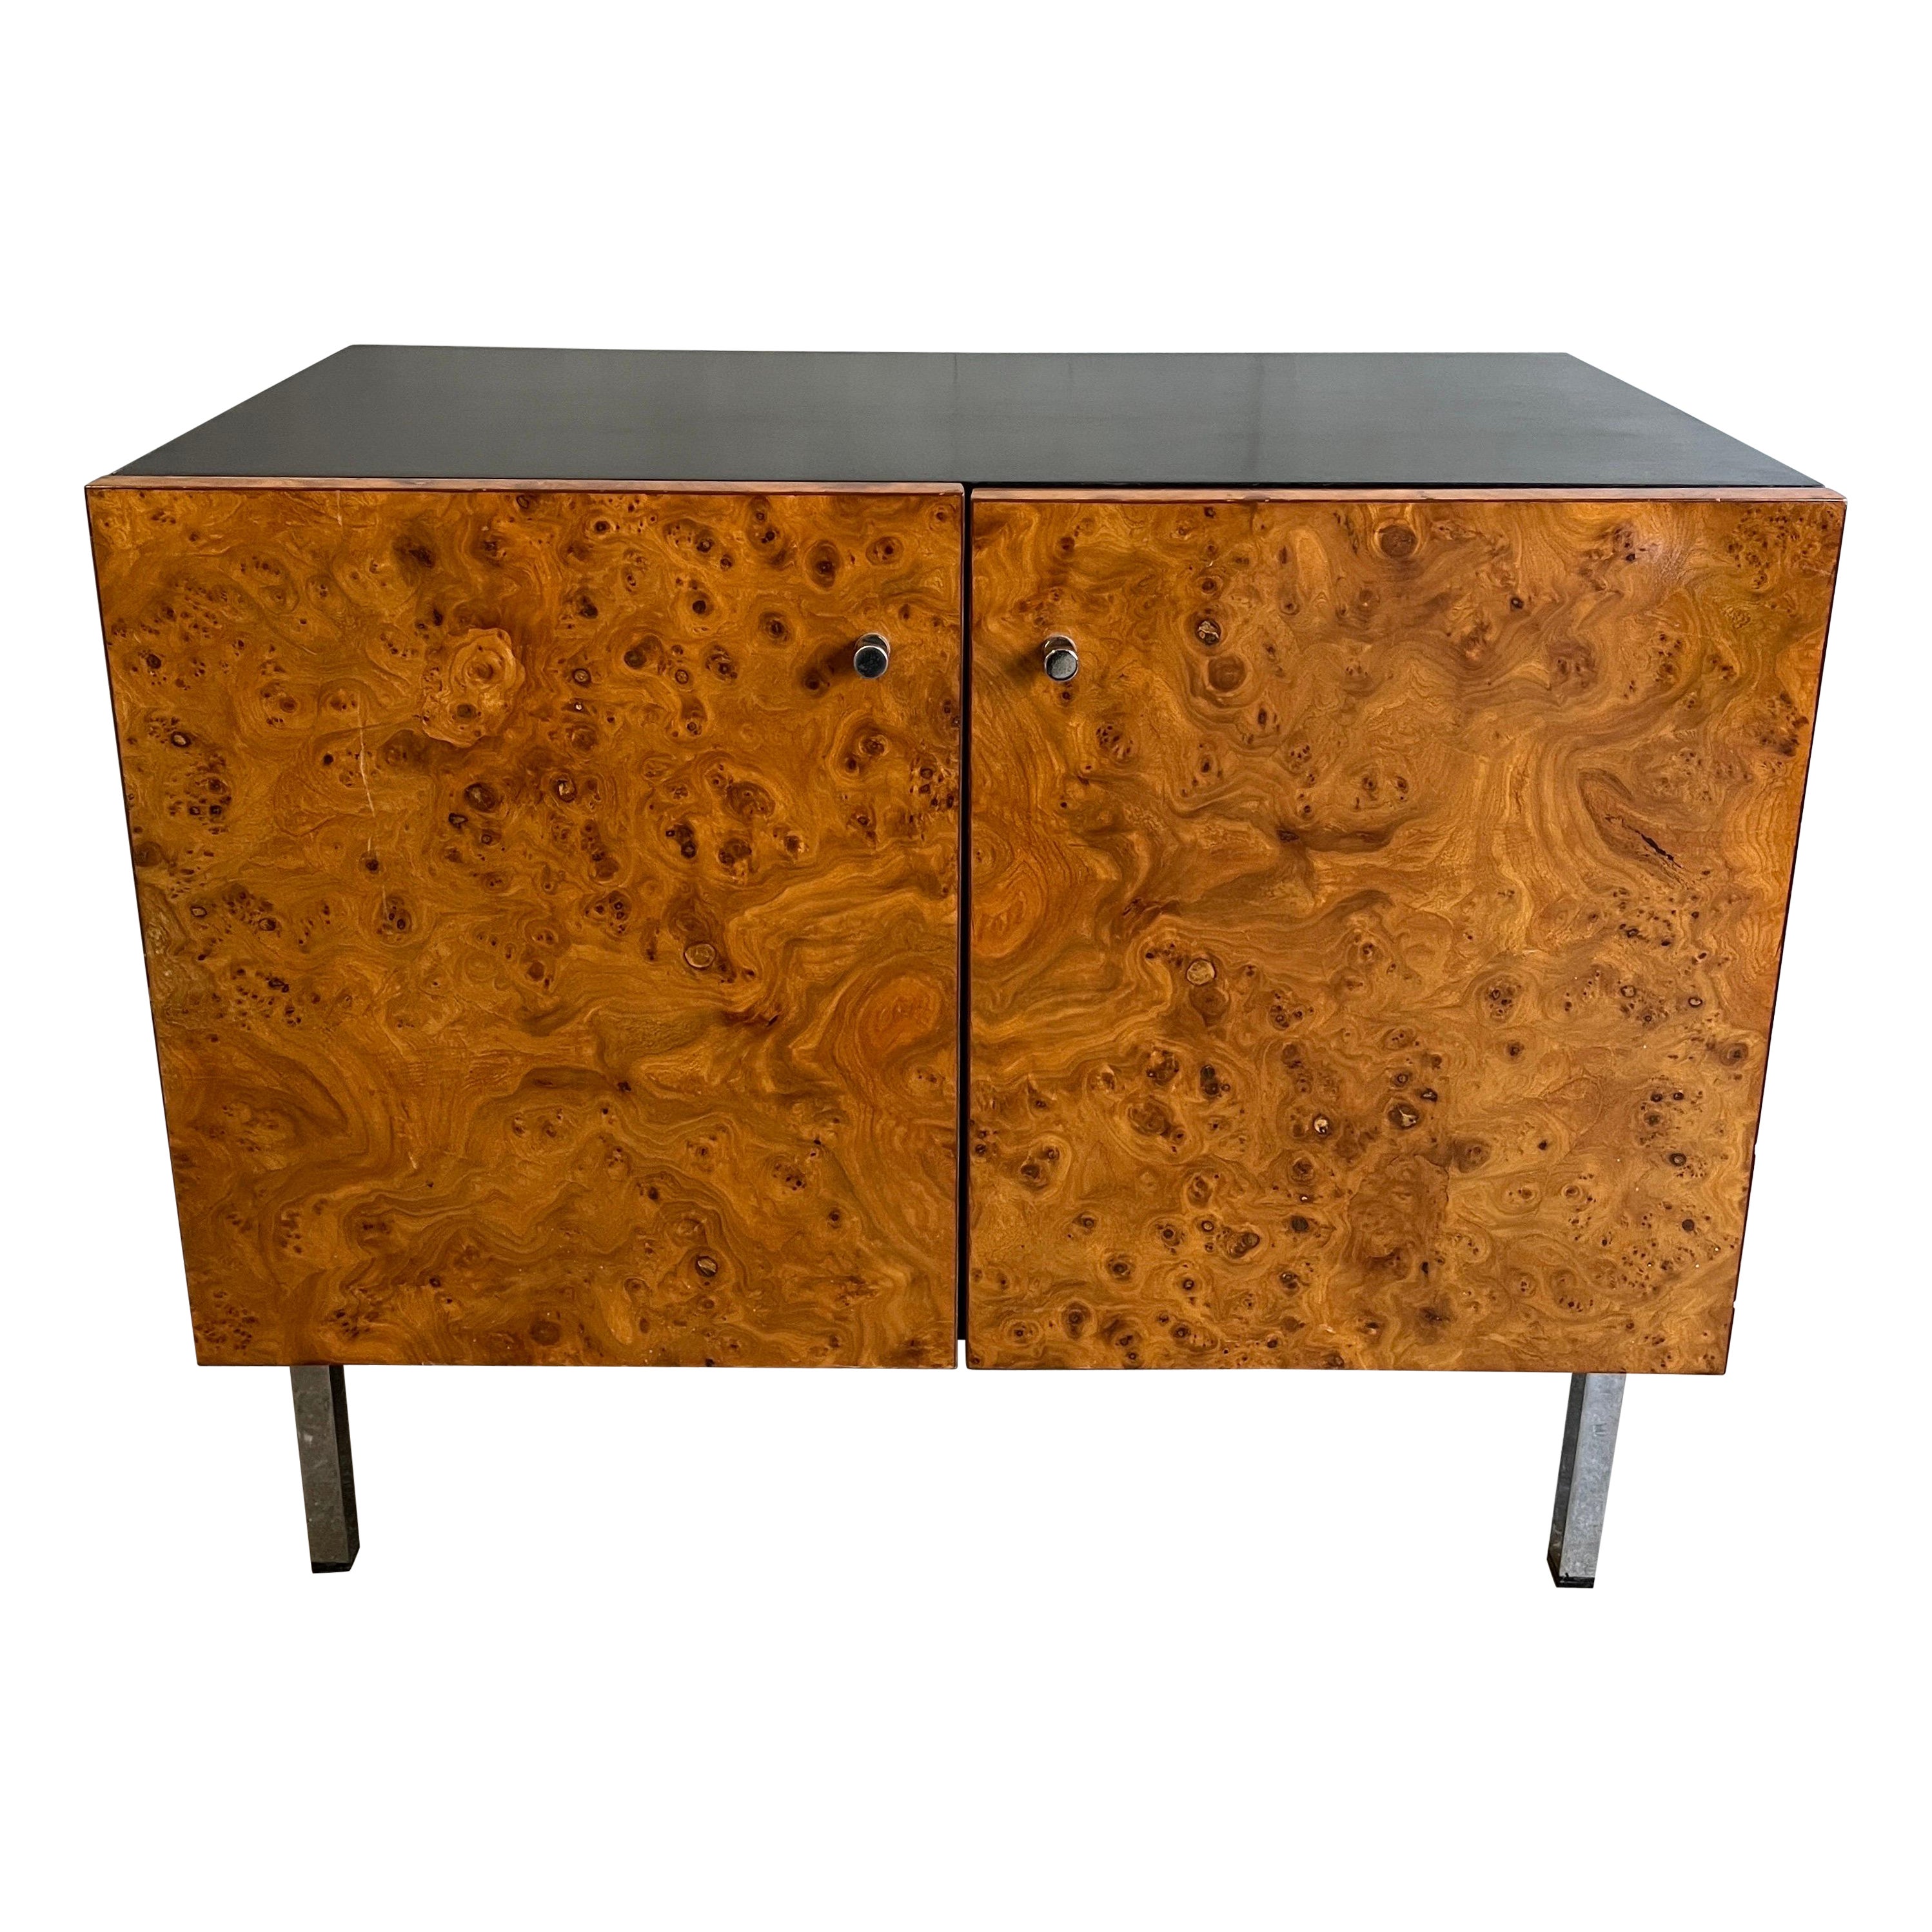 Midcentury lacquered Credenza or Cabinet in Burl Wood